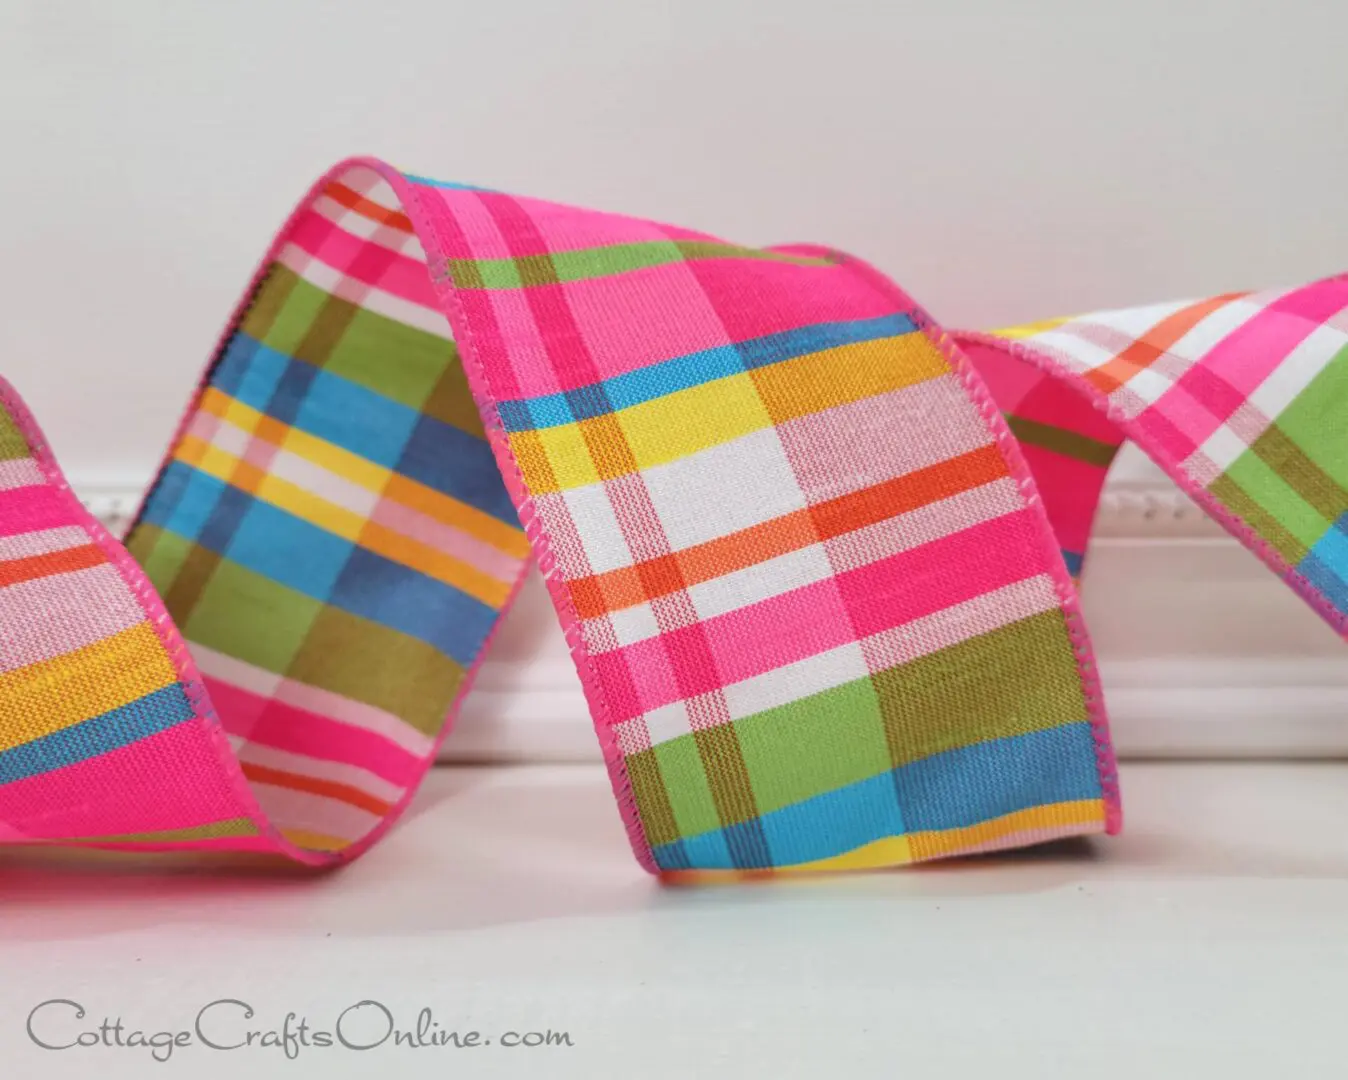 a brightly colored plaid ribbon on a white surface.